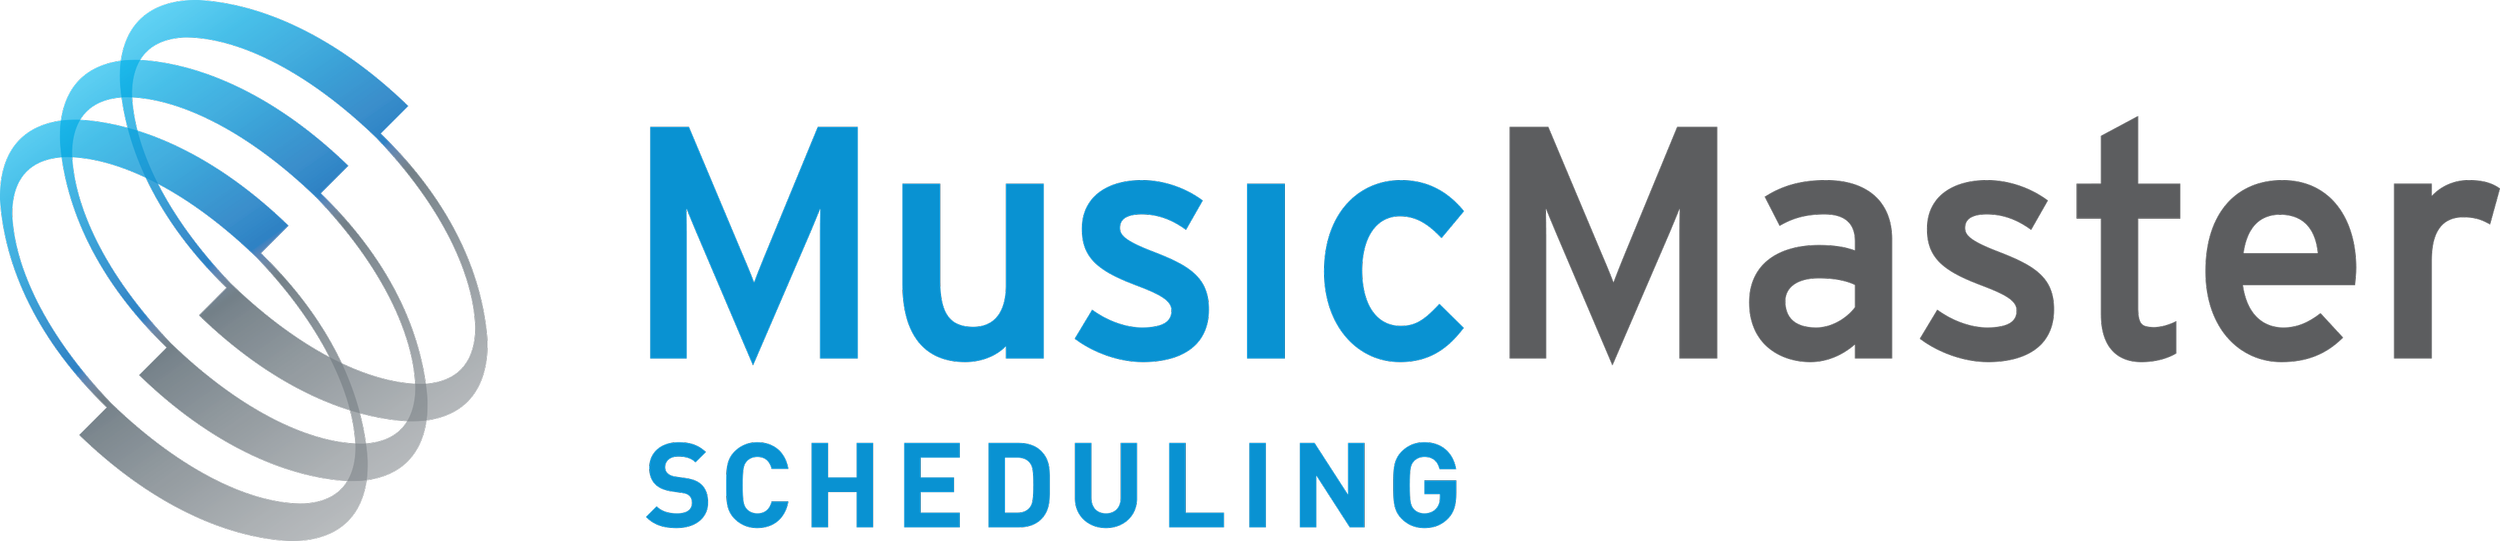 musicmaster_logo_vector_LARGE.png